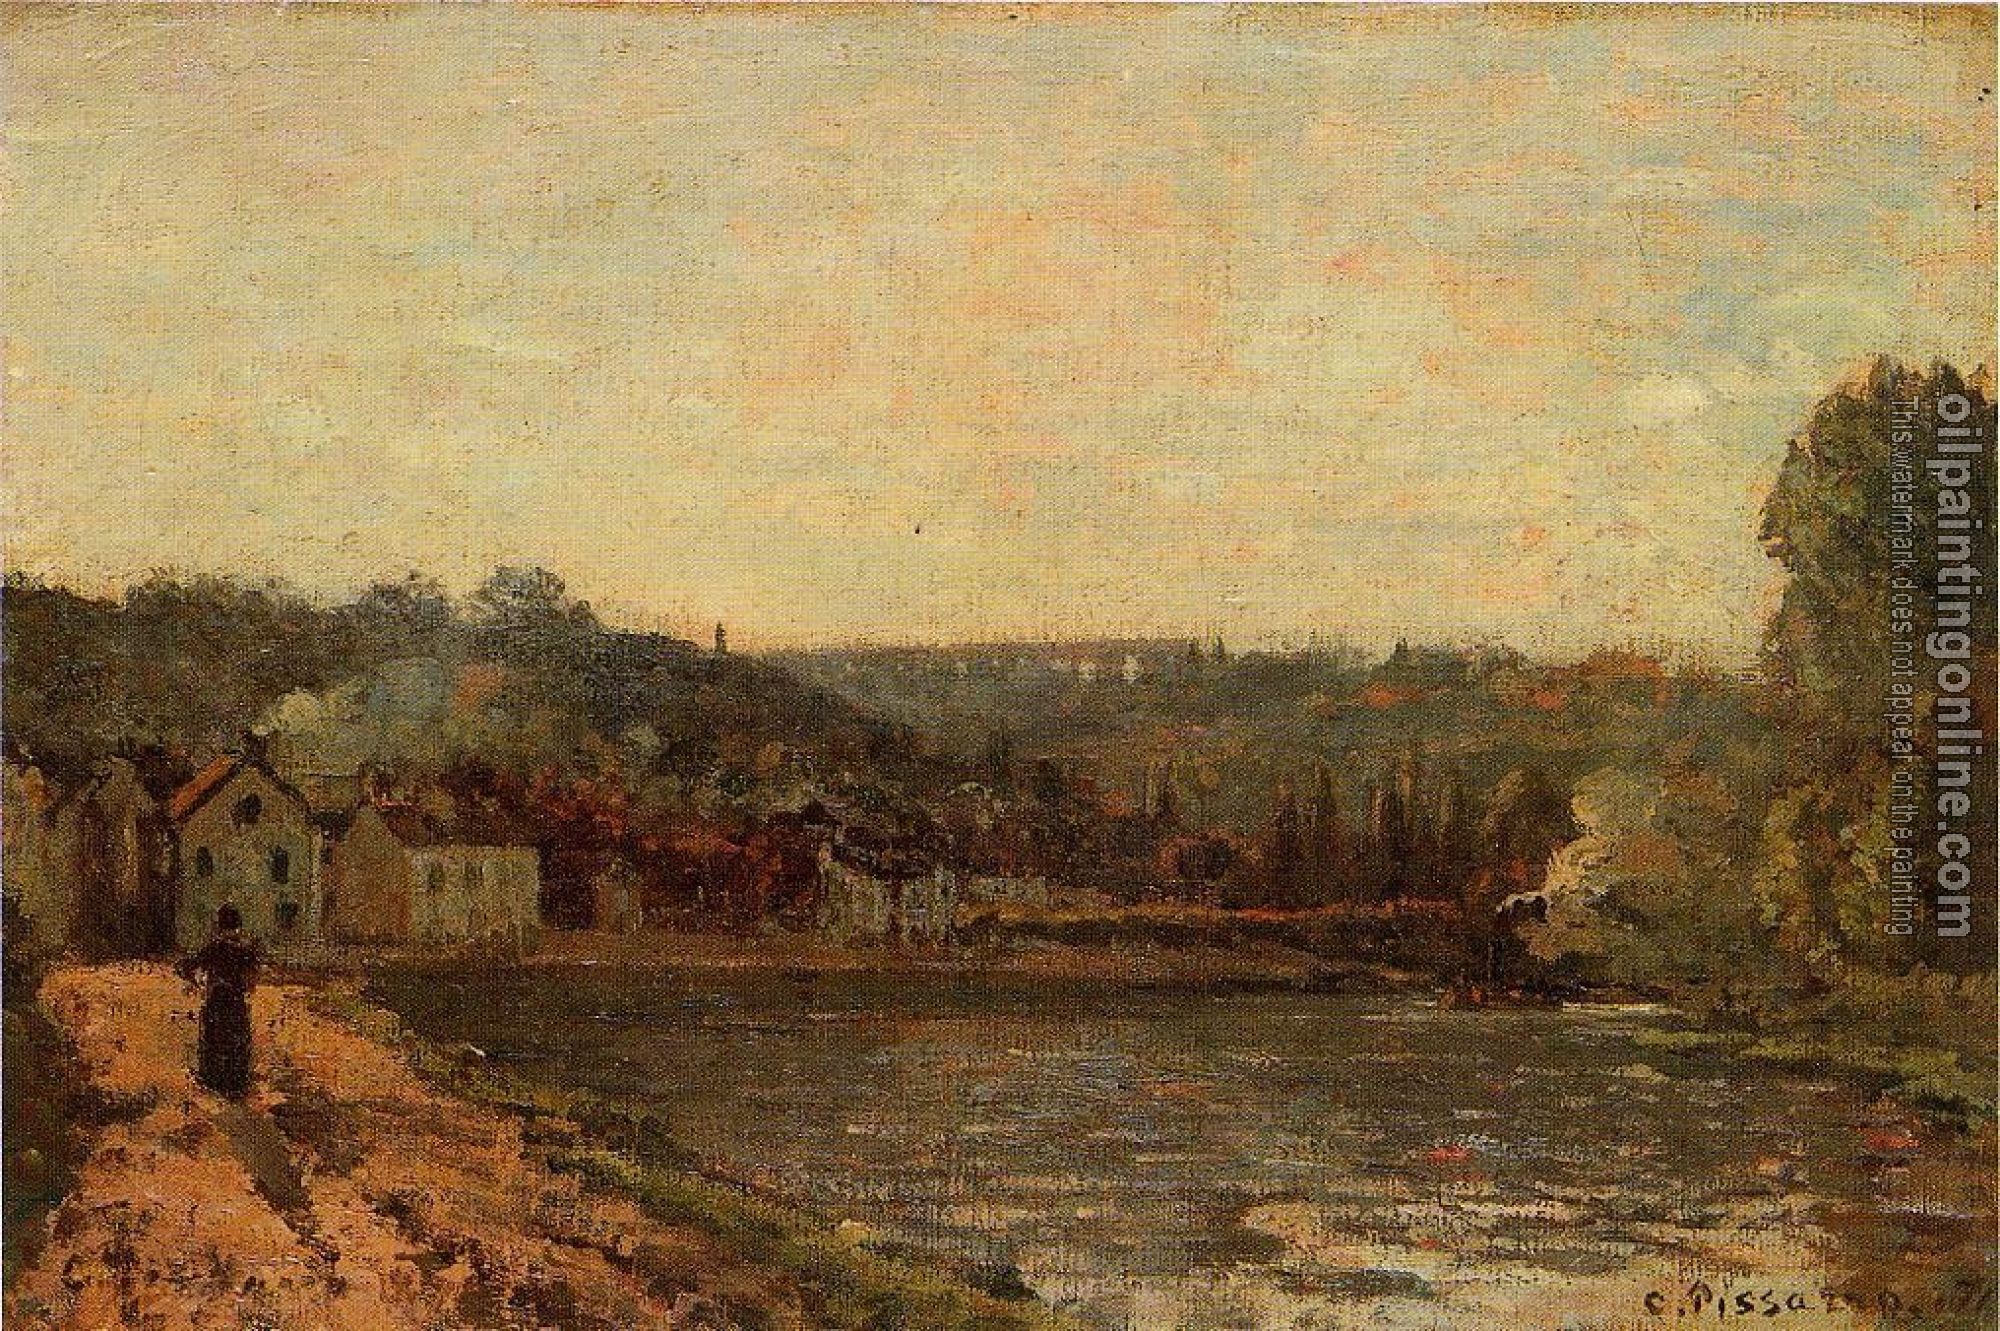 Pissarro, Camille - The Banks of the Seine at Bougival